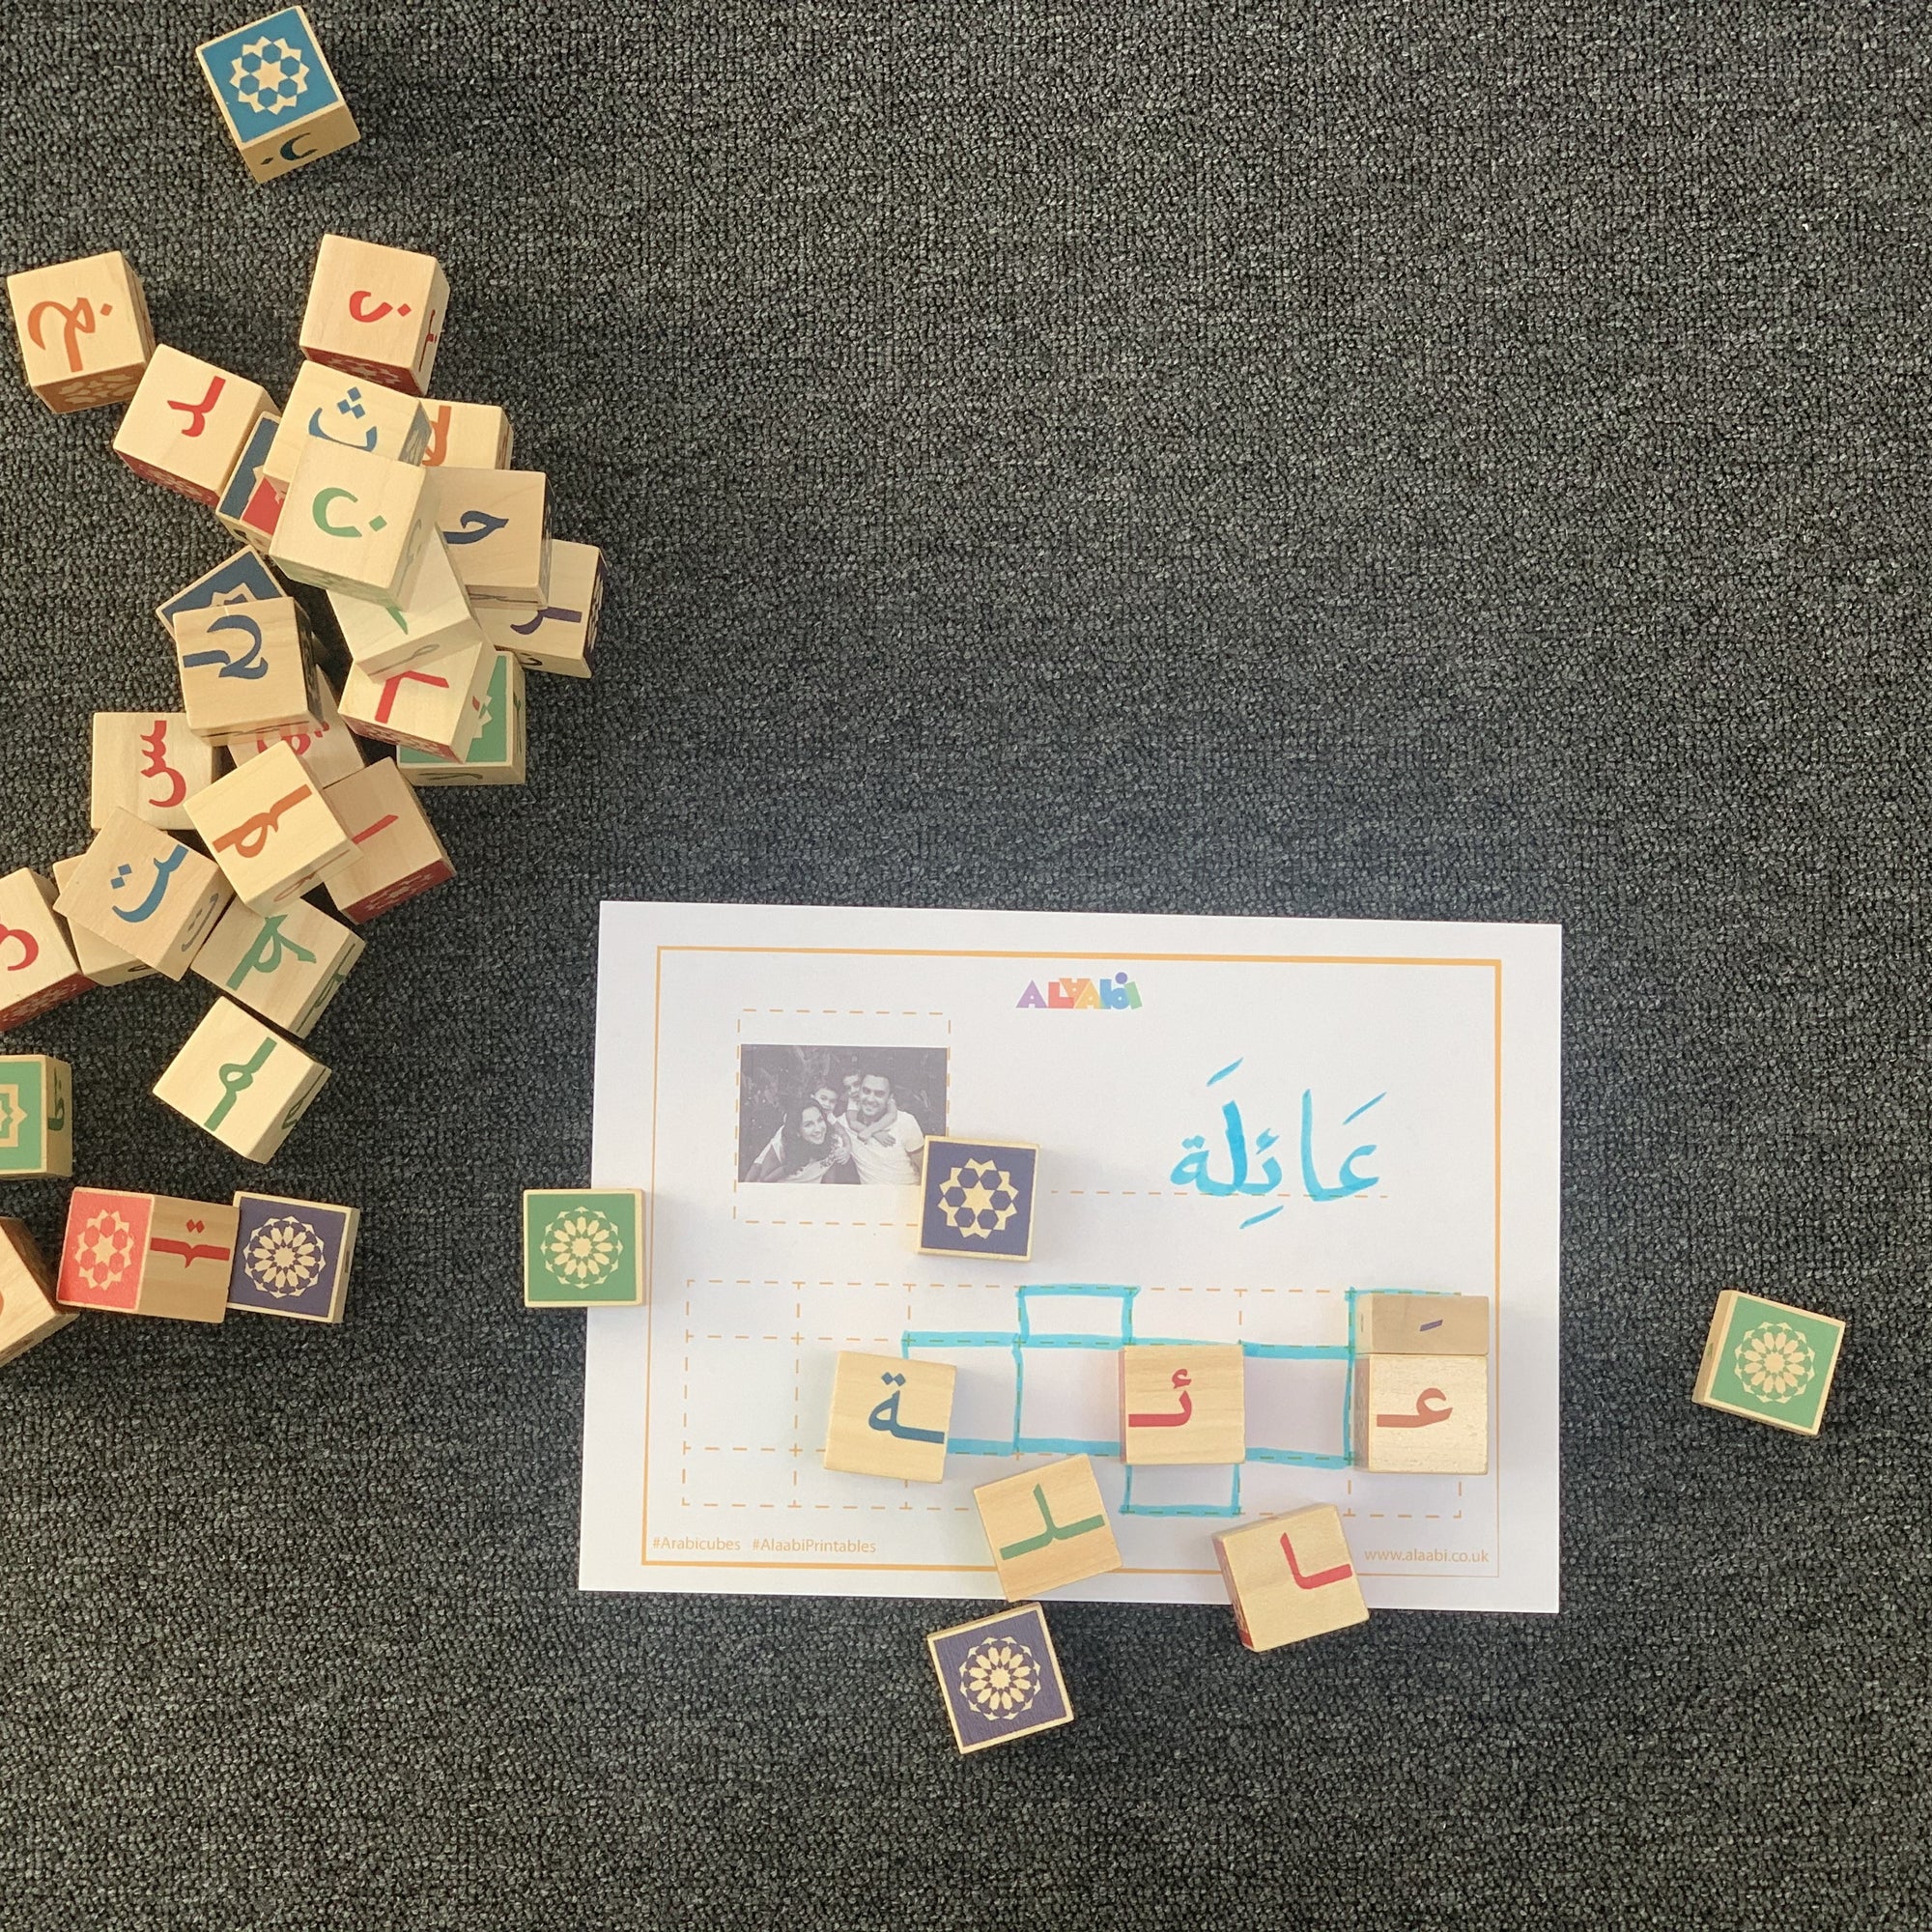 Uncovering the hidden gems in daily routines for Arabic teaching